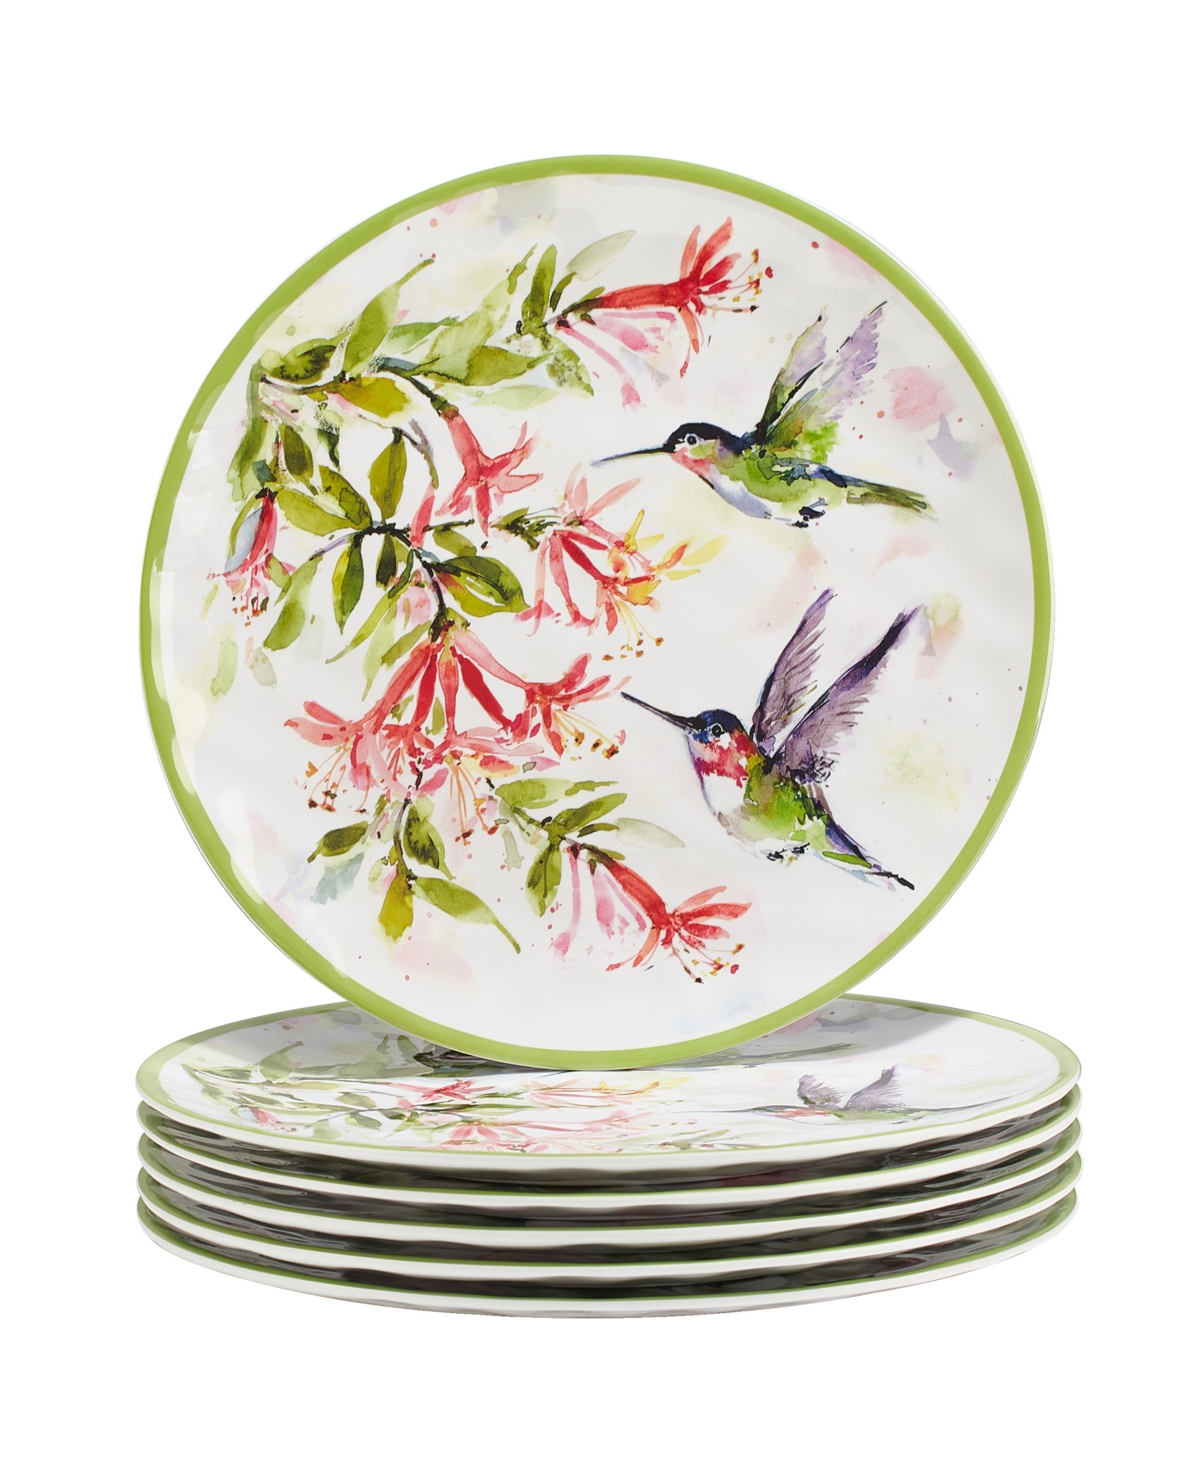 Hummingbird Dinner Plate 11", Service For 6 - Miscellaneous